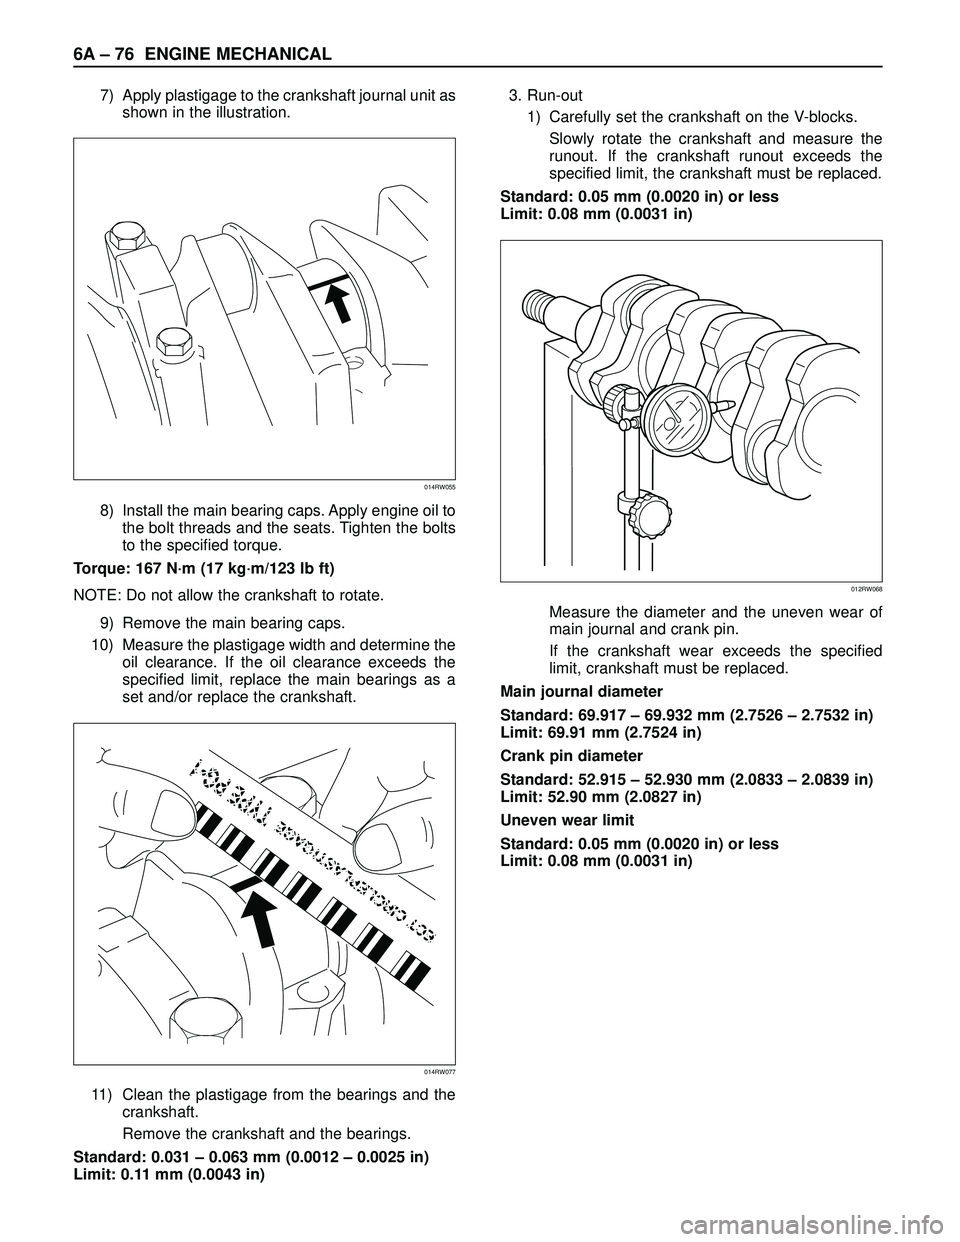 ISUZU TROOPER 1998  Service Repair Manual 6A– 76 ENGINE MECHANICAL
7) Apply plastigage to the crankshaft journal unit as
shown in the illustration.
8) Install the main bearing caps. Apply engine oil to
the bolt threads and the seats. Tighte